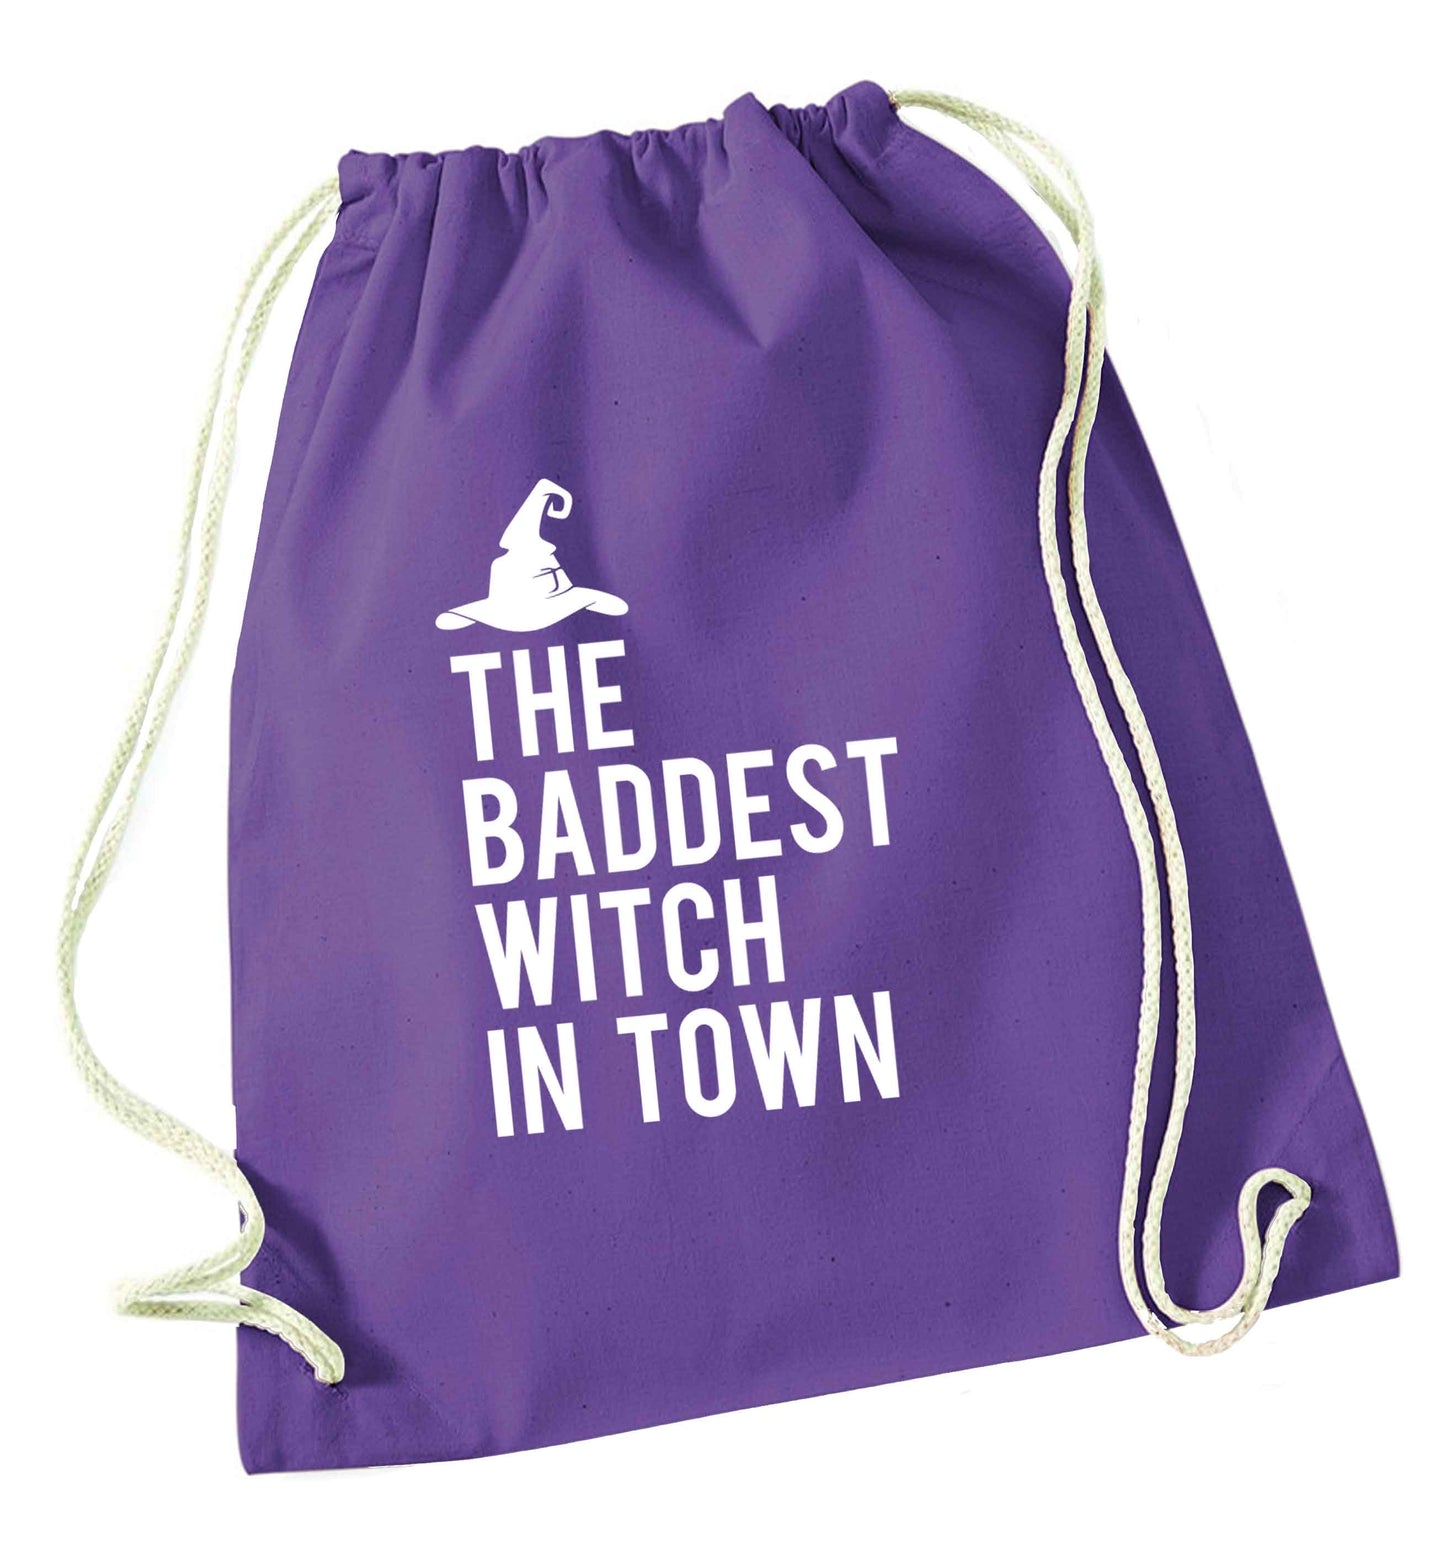 Badest witch in town purple drawstring bag